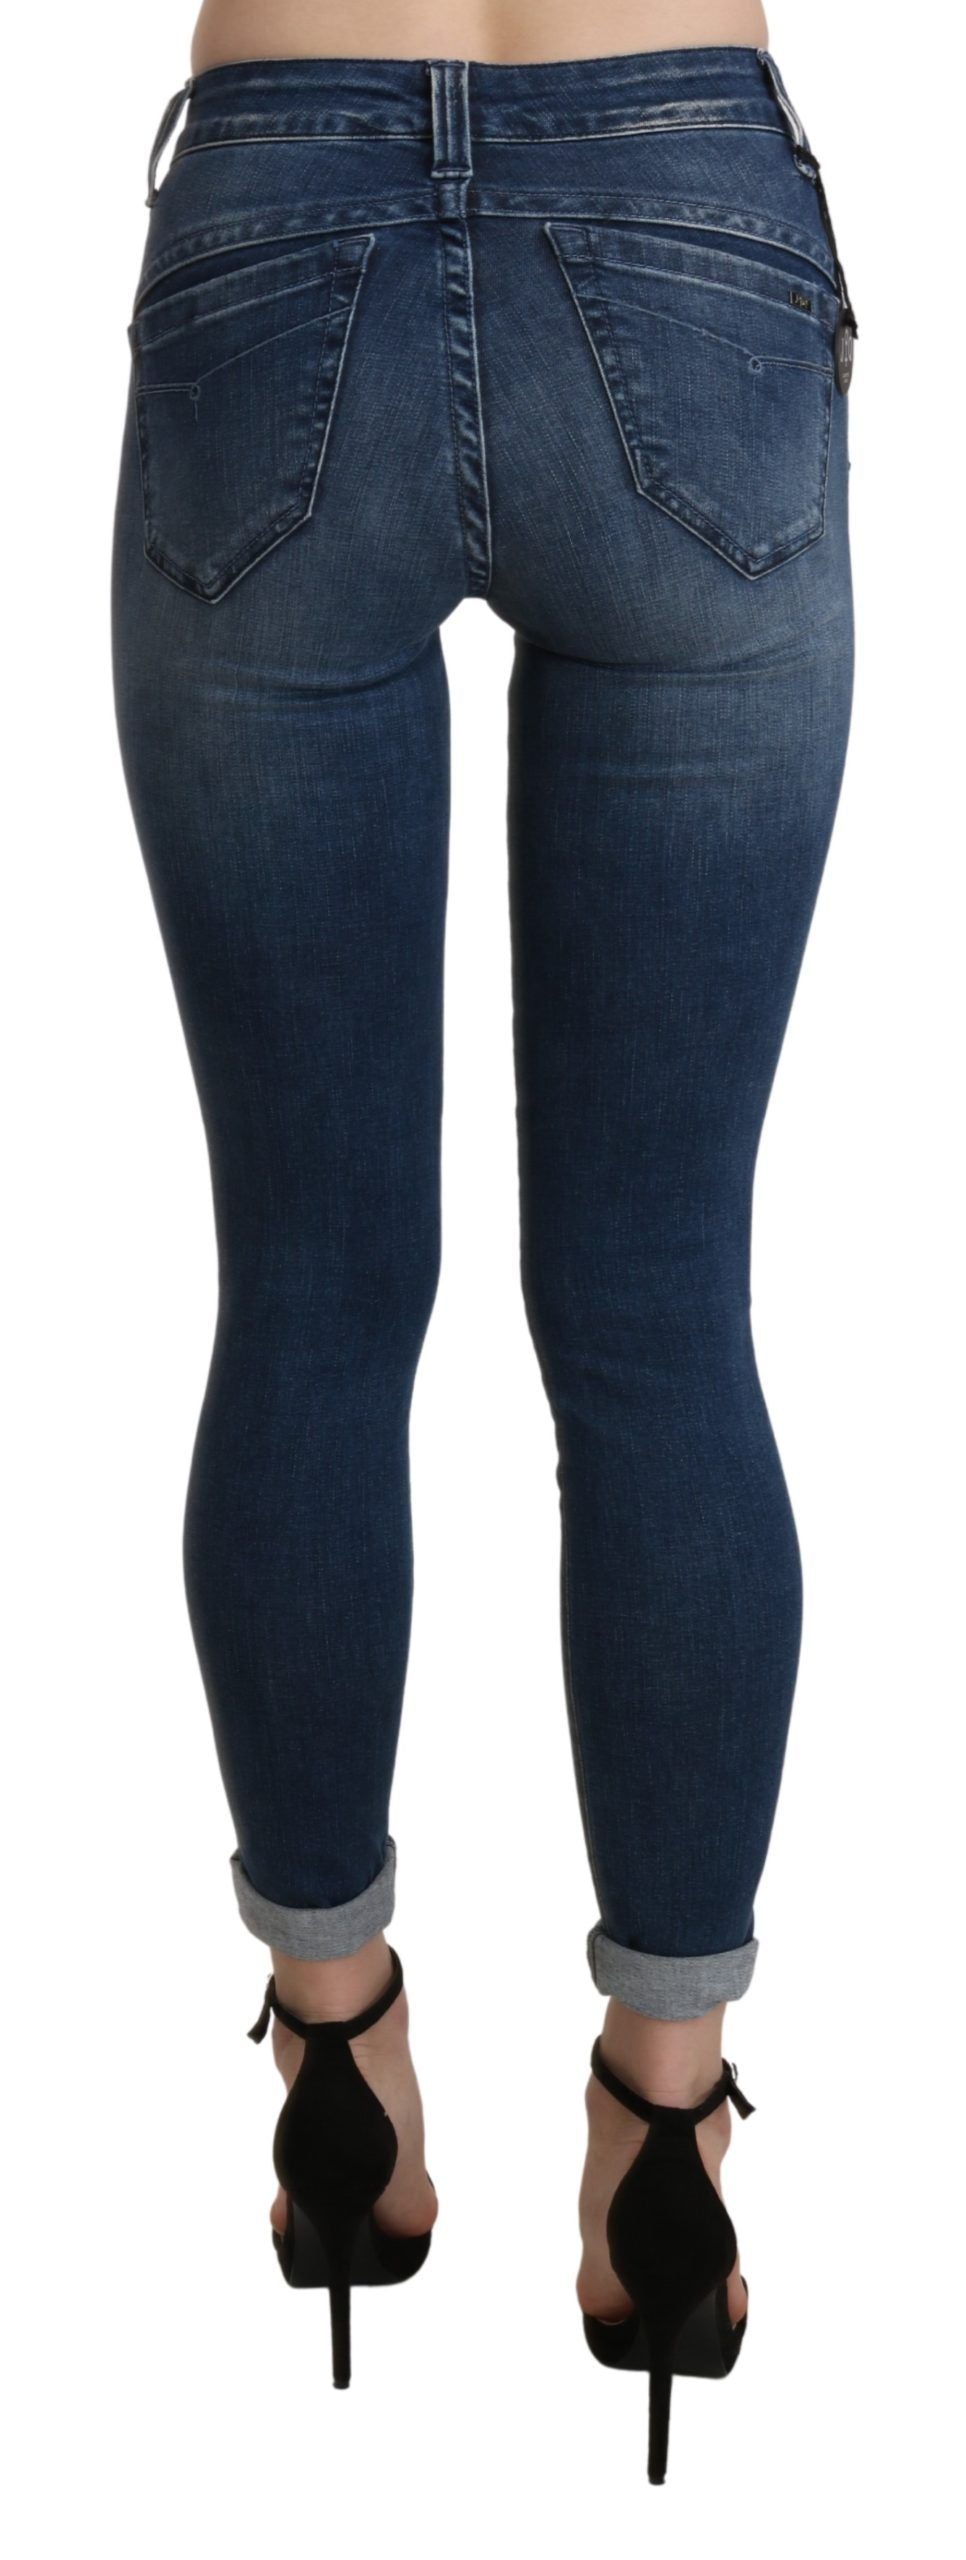 Ermanno Scervino Chic Blue High Waist Cropped Jeans